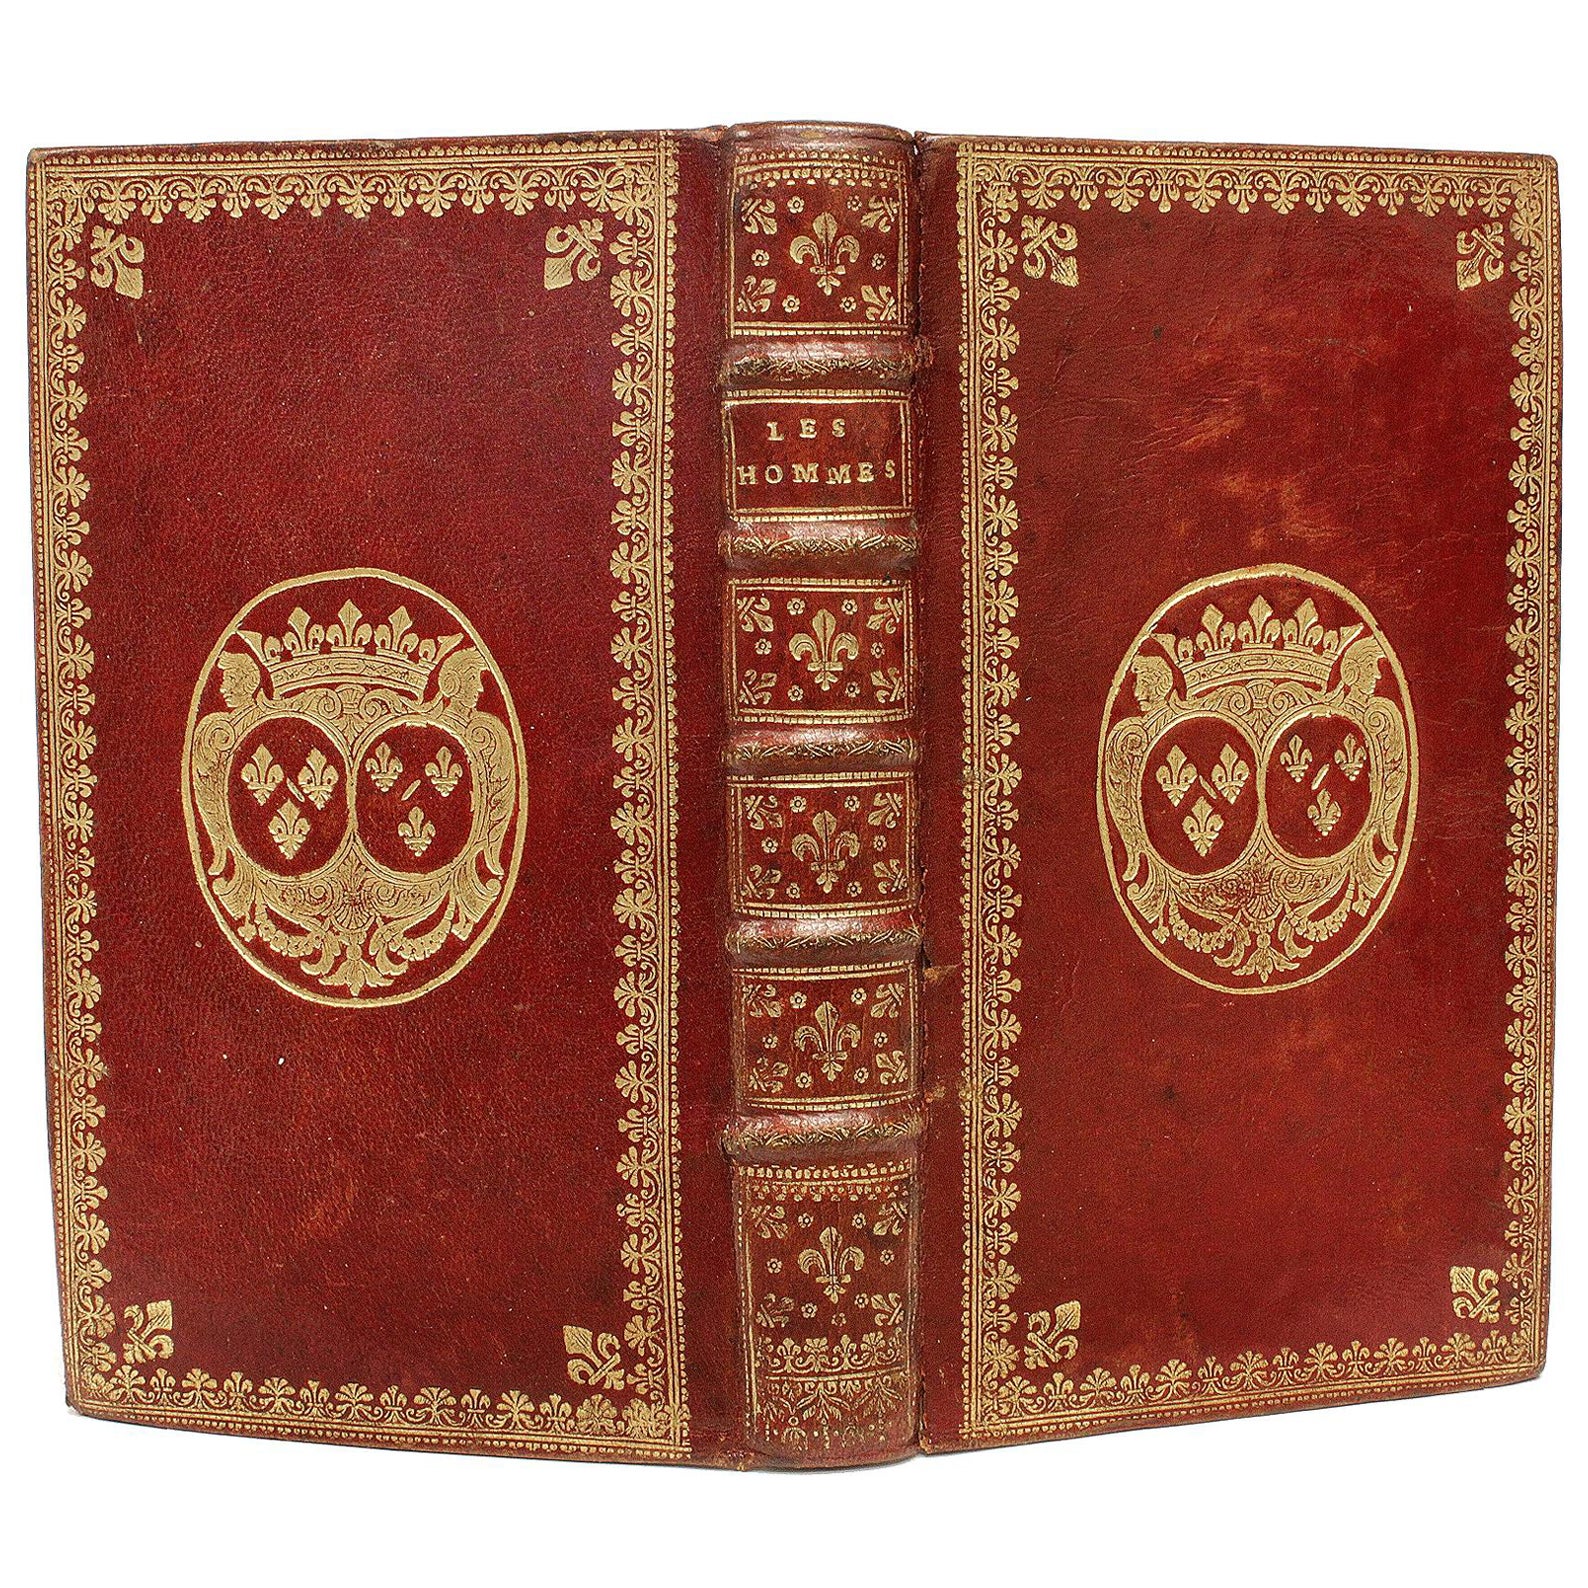 VARENNES. Les Hommes. 1712 - 1st ED - WITH THE GILT ARMS OF LOUIS XIV's DAUGHTER